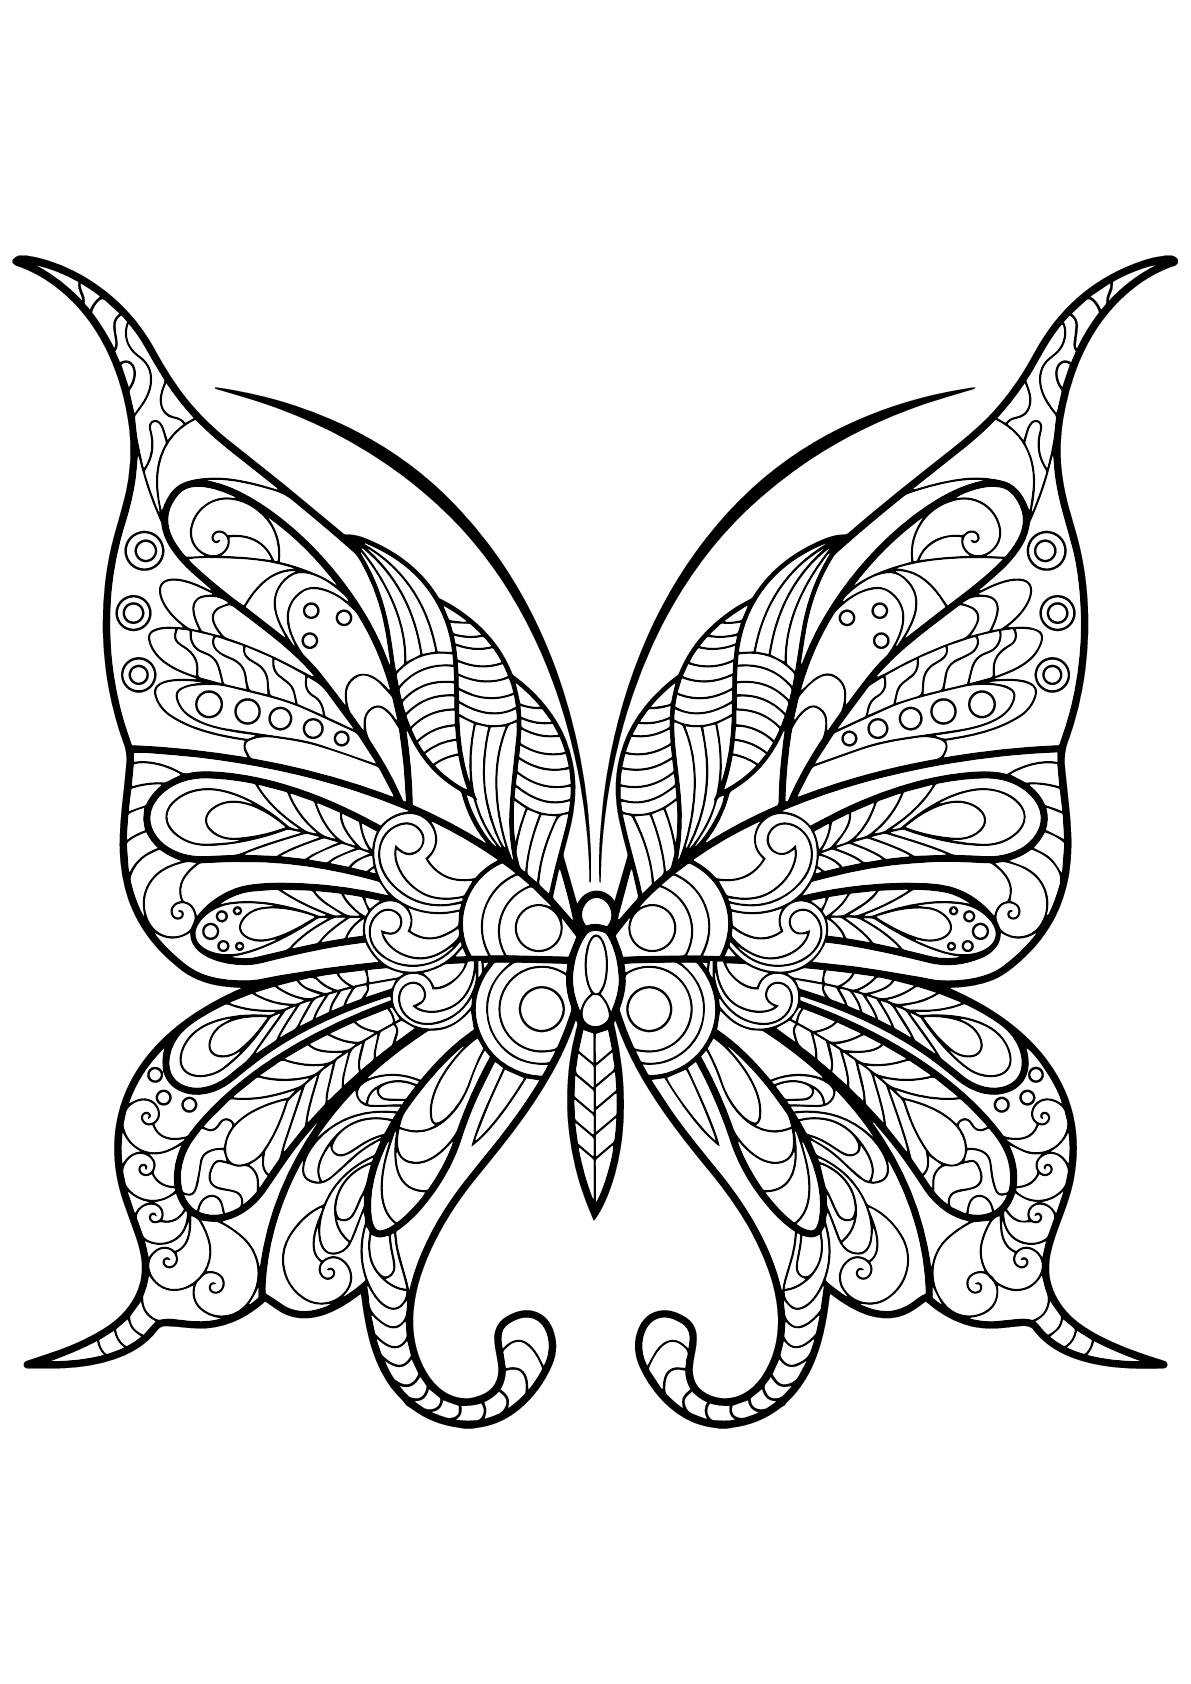 Butterfly beautiful patterns 9 - Butterflies & insects Adult Coloring Pages